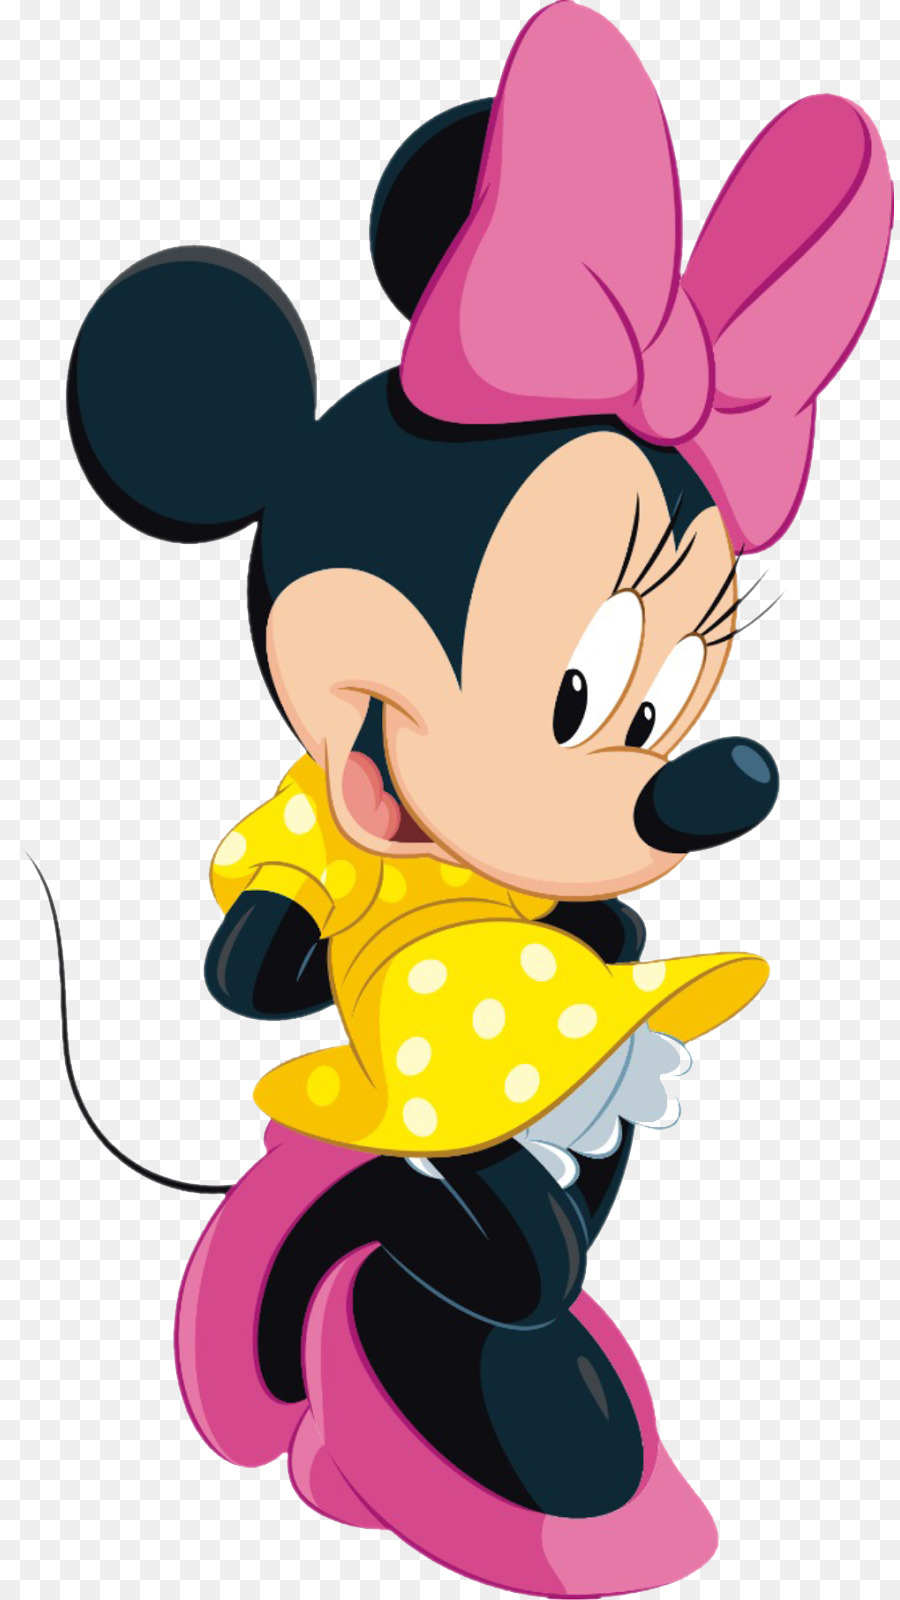 Free Minnie Mouse Transparent Background, Download Free Minnie Mouse ...